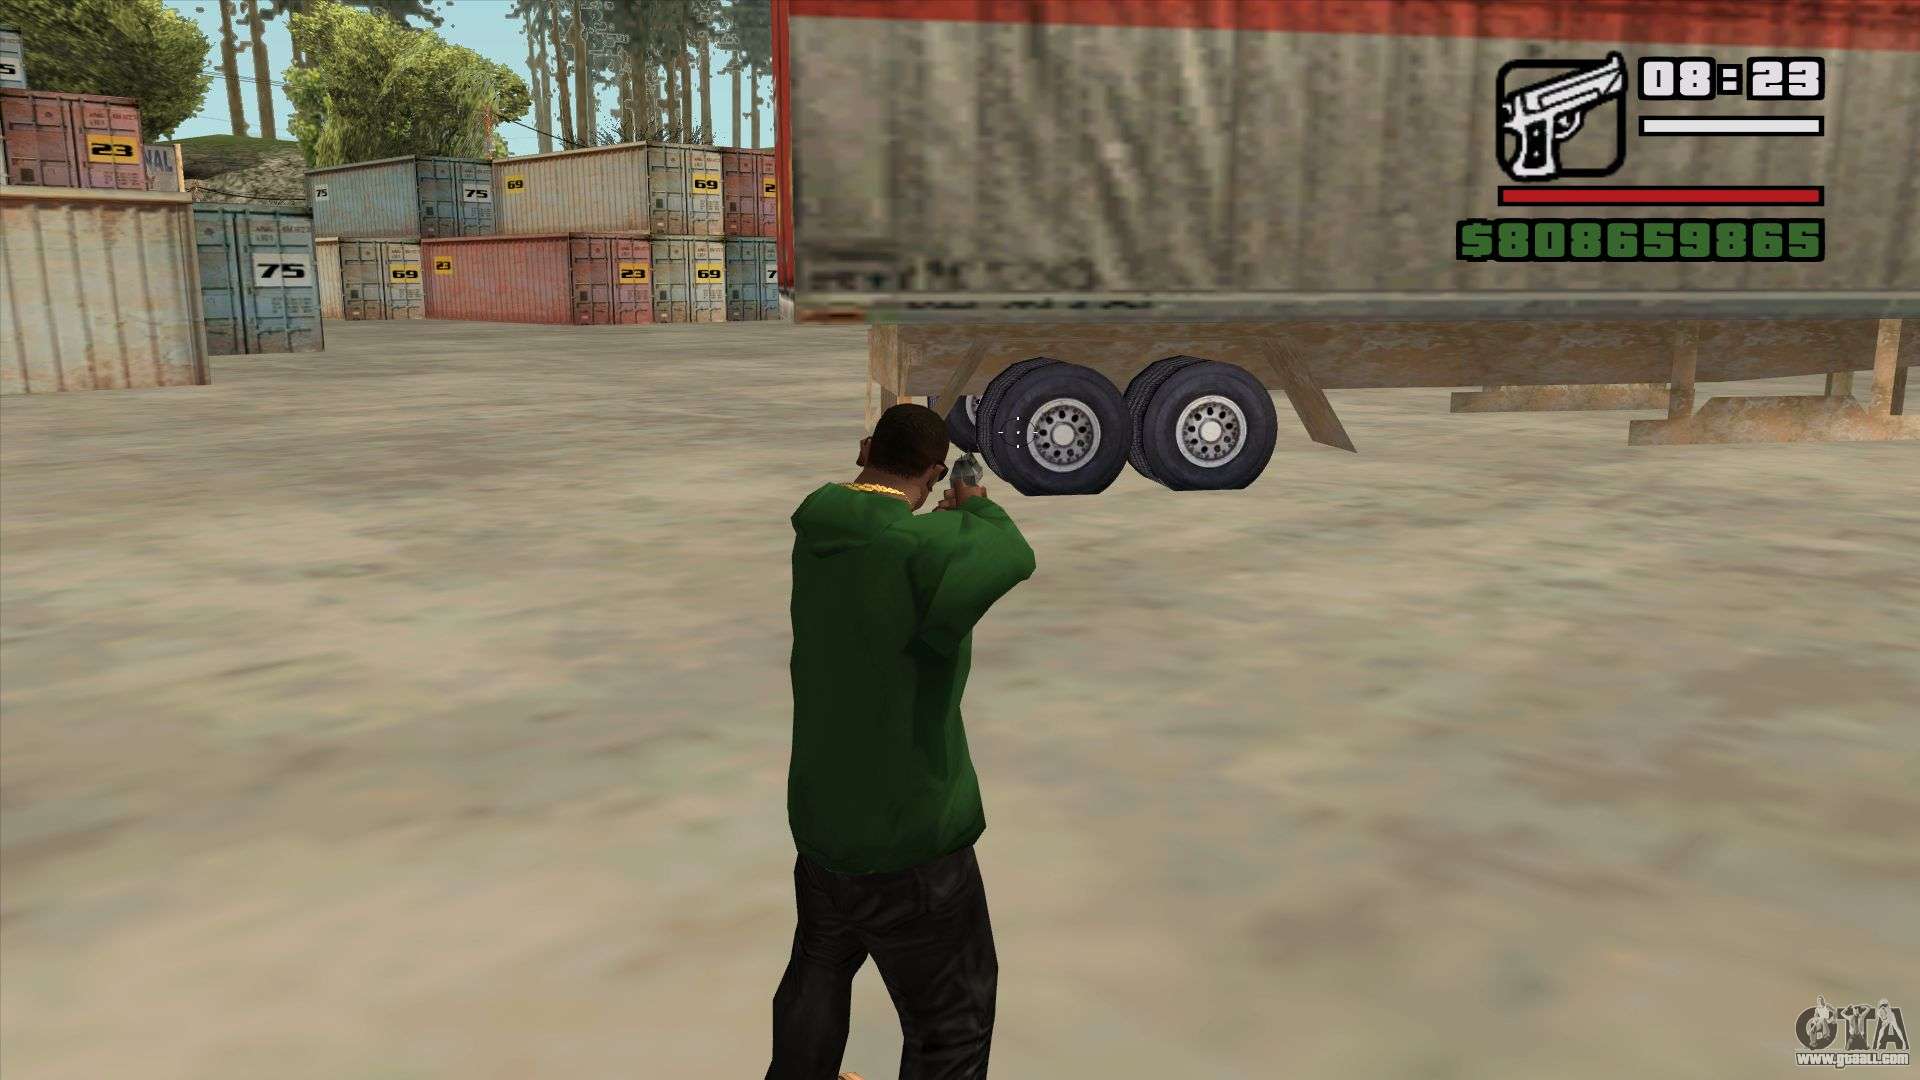 Weapon Realism Mod for Grand Theft Auto IV - Mod DB